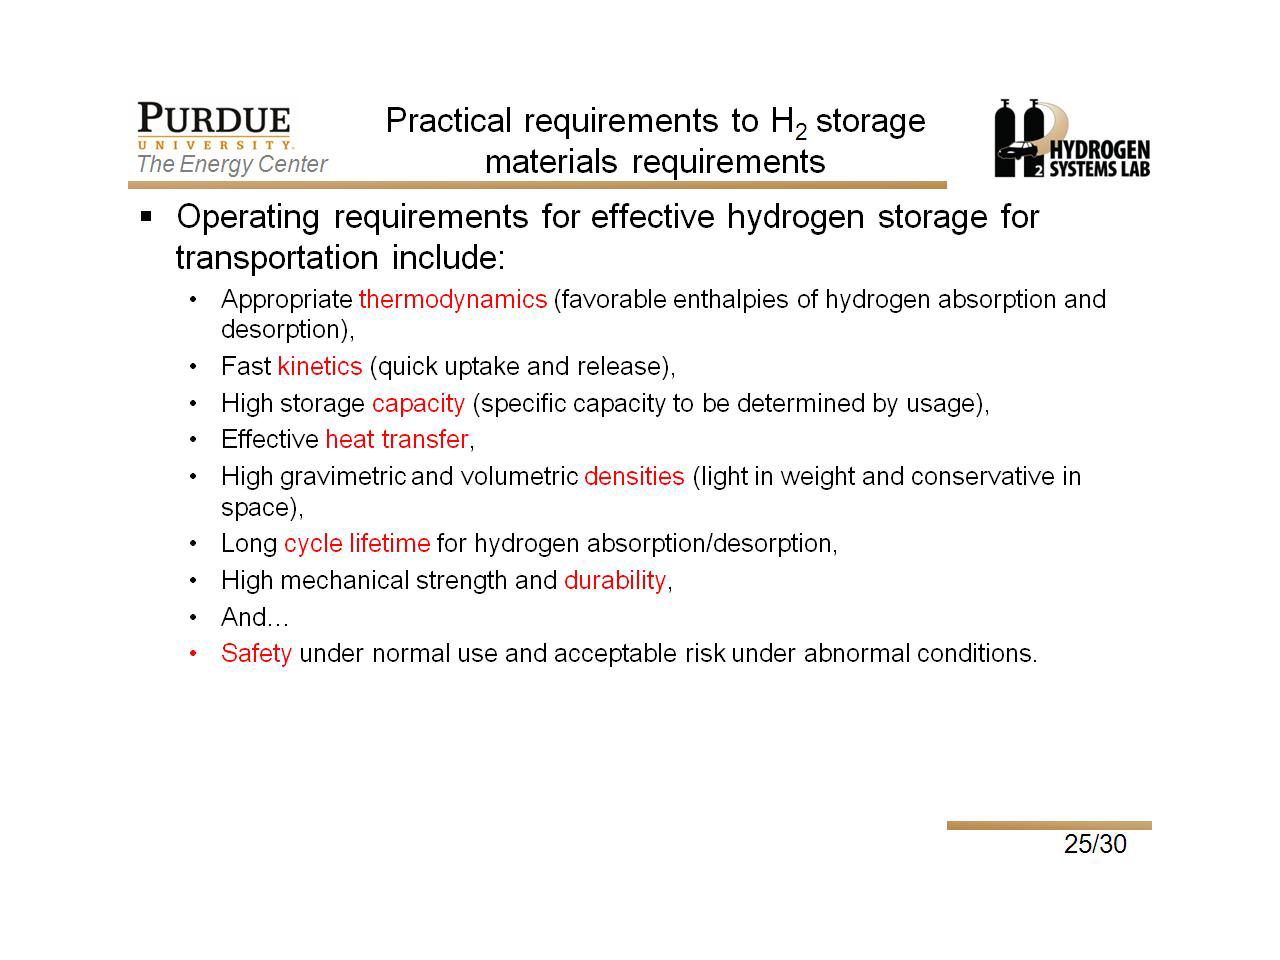 Practical requirements to H2 storage materials requirements